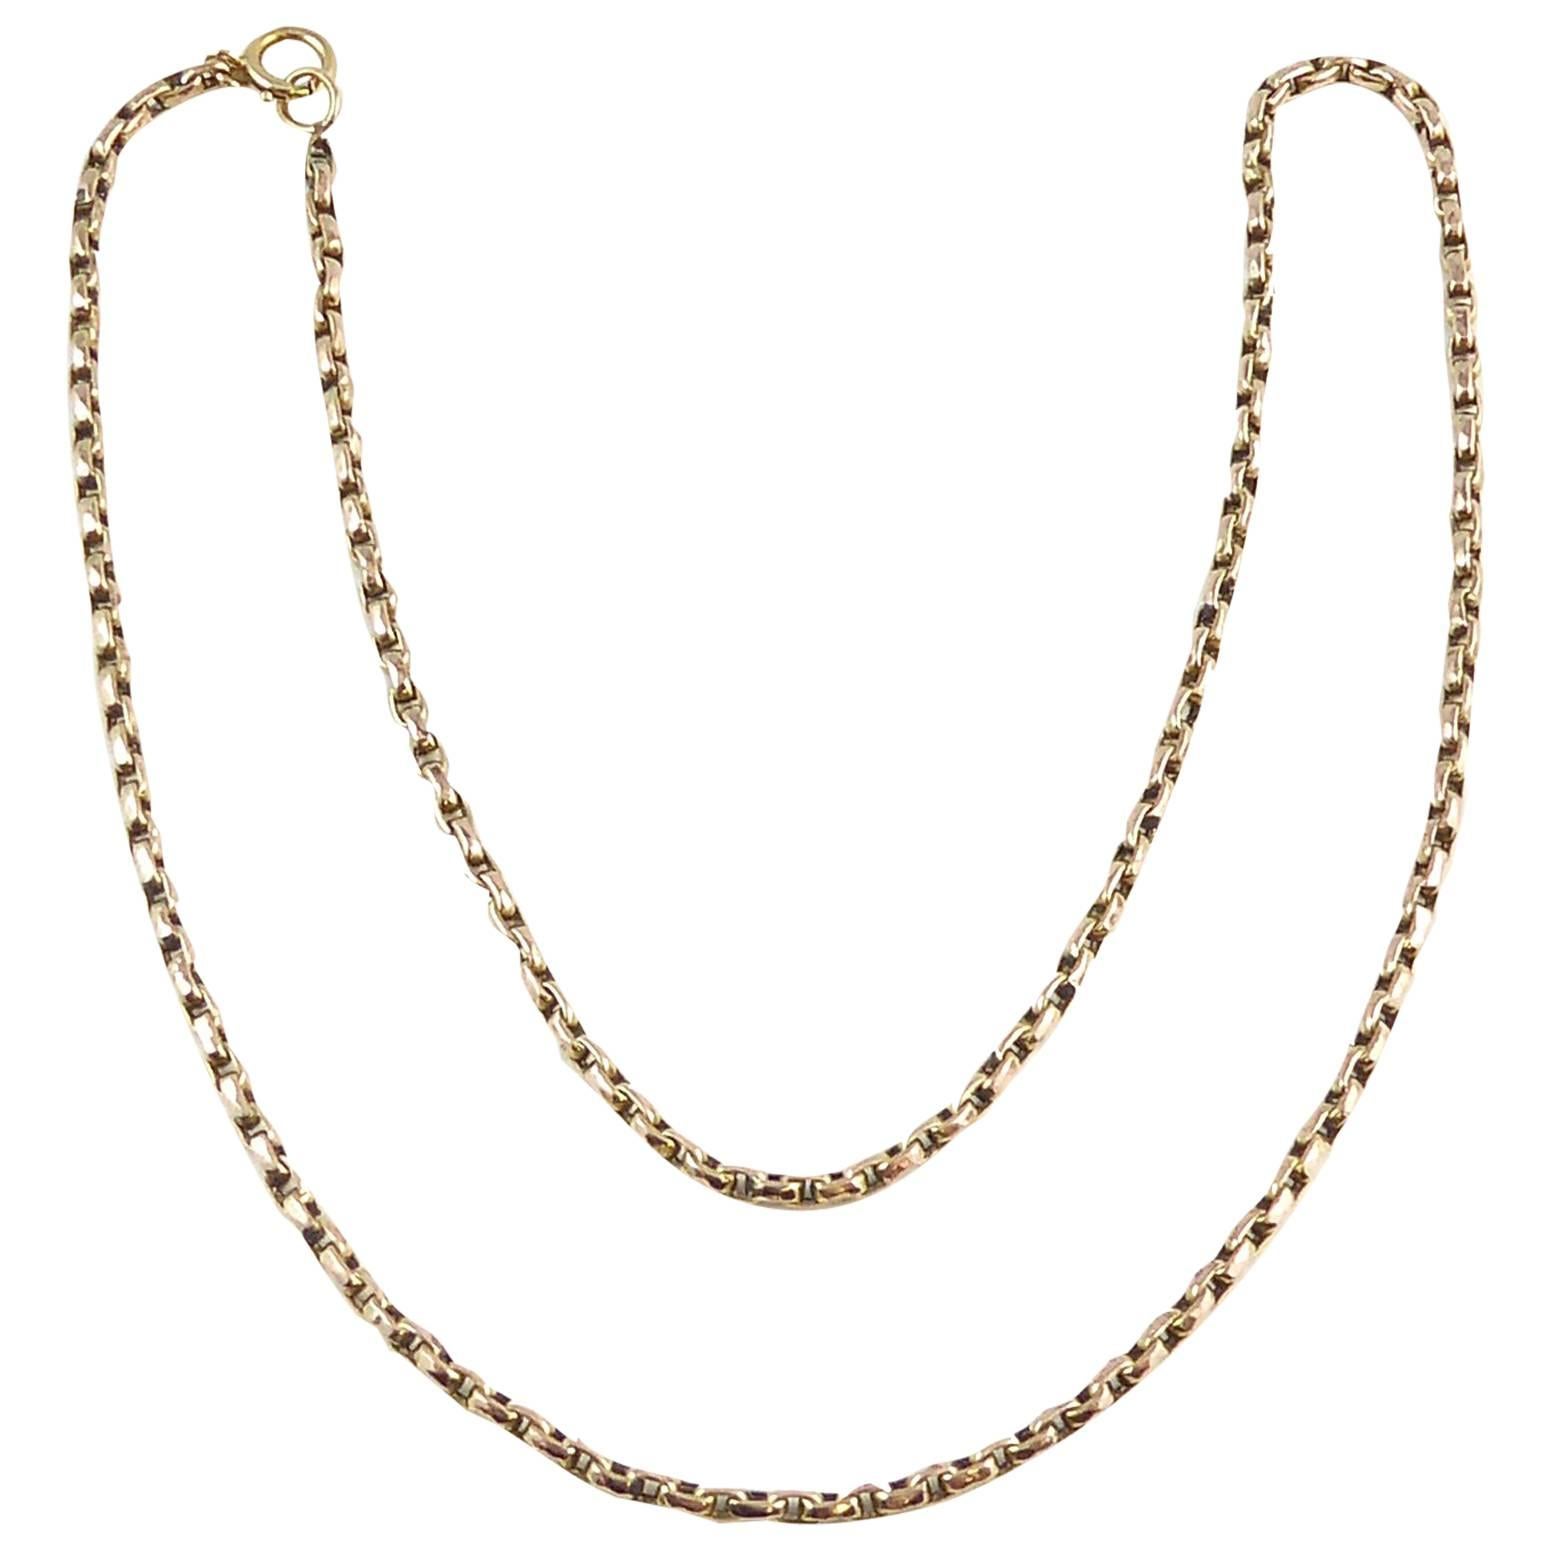 Victorian Rose Gold Chain, Oval Links, Tests as 9 Carat, circa 1900